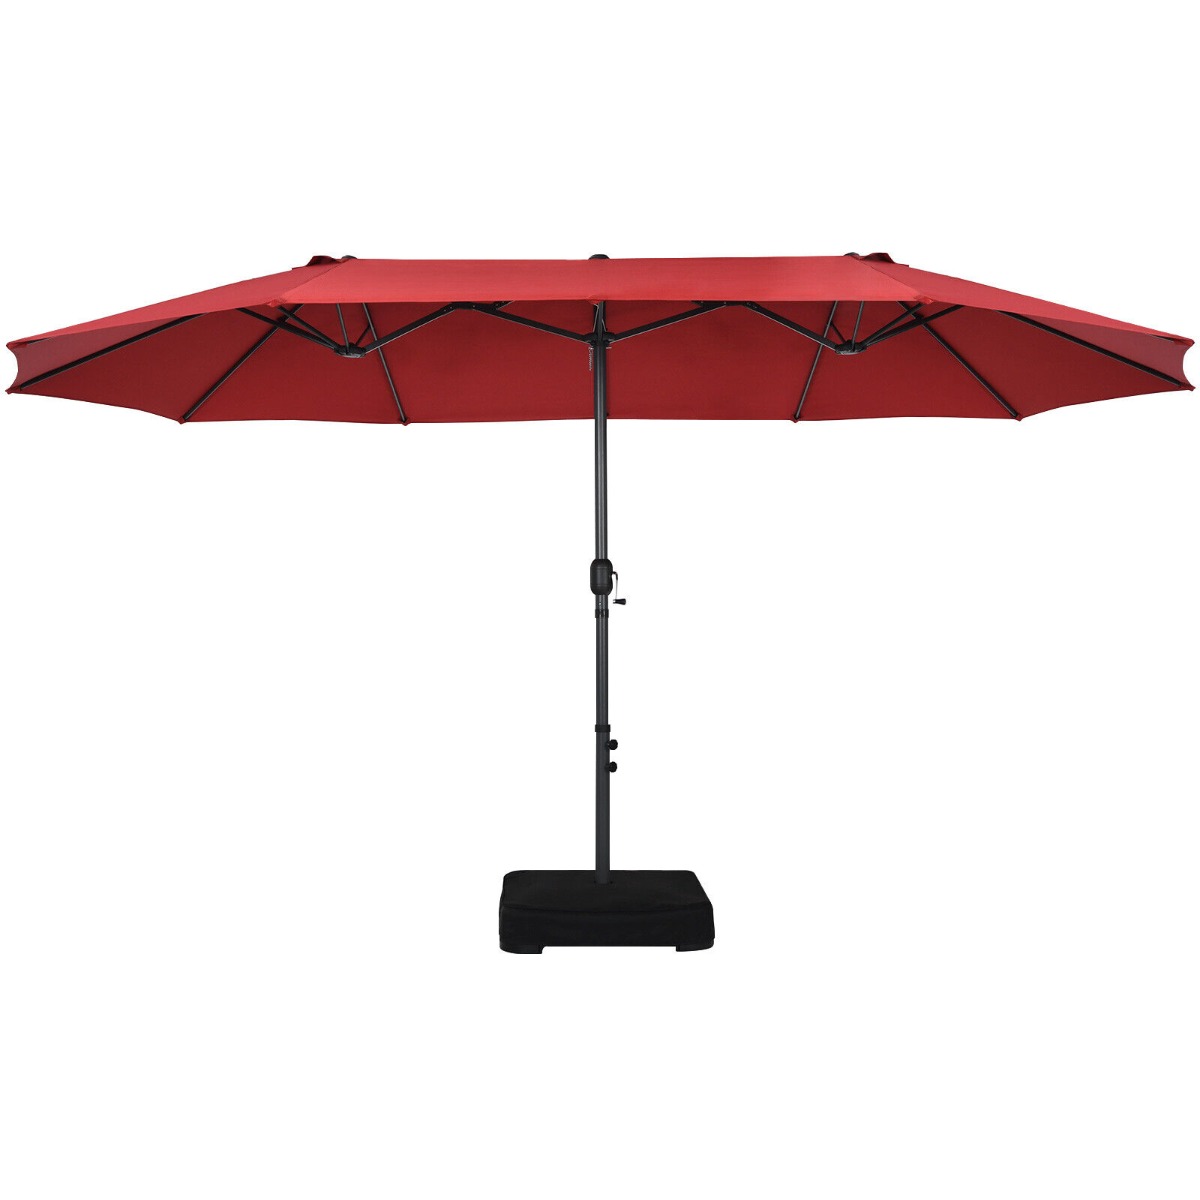 450CM Double Sided Outdoor Umbrella Twin Size with Crank Handle-Wine